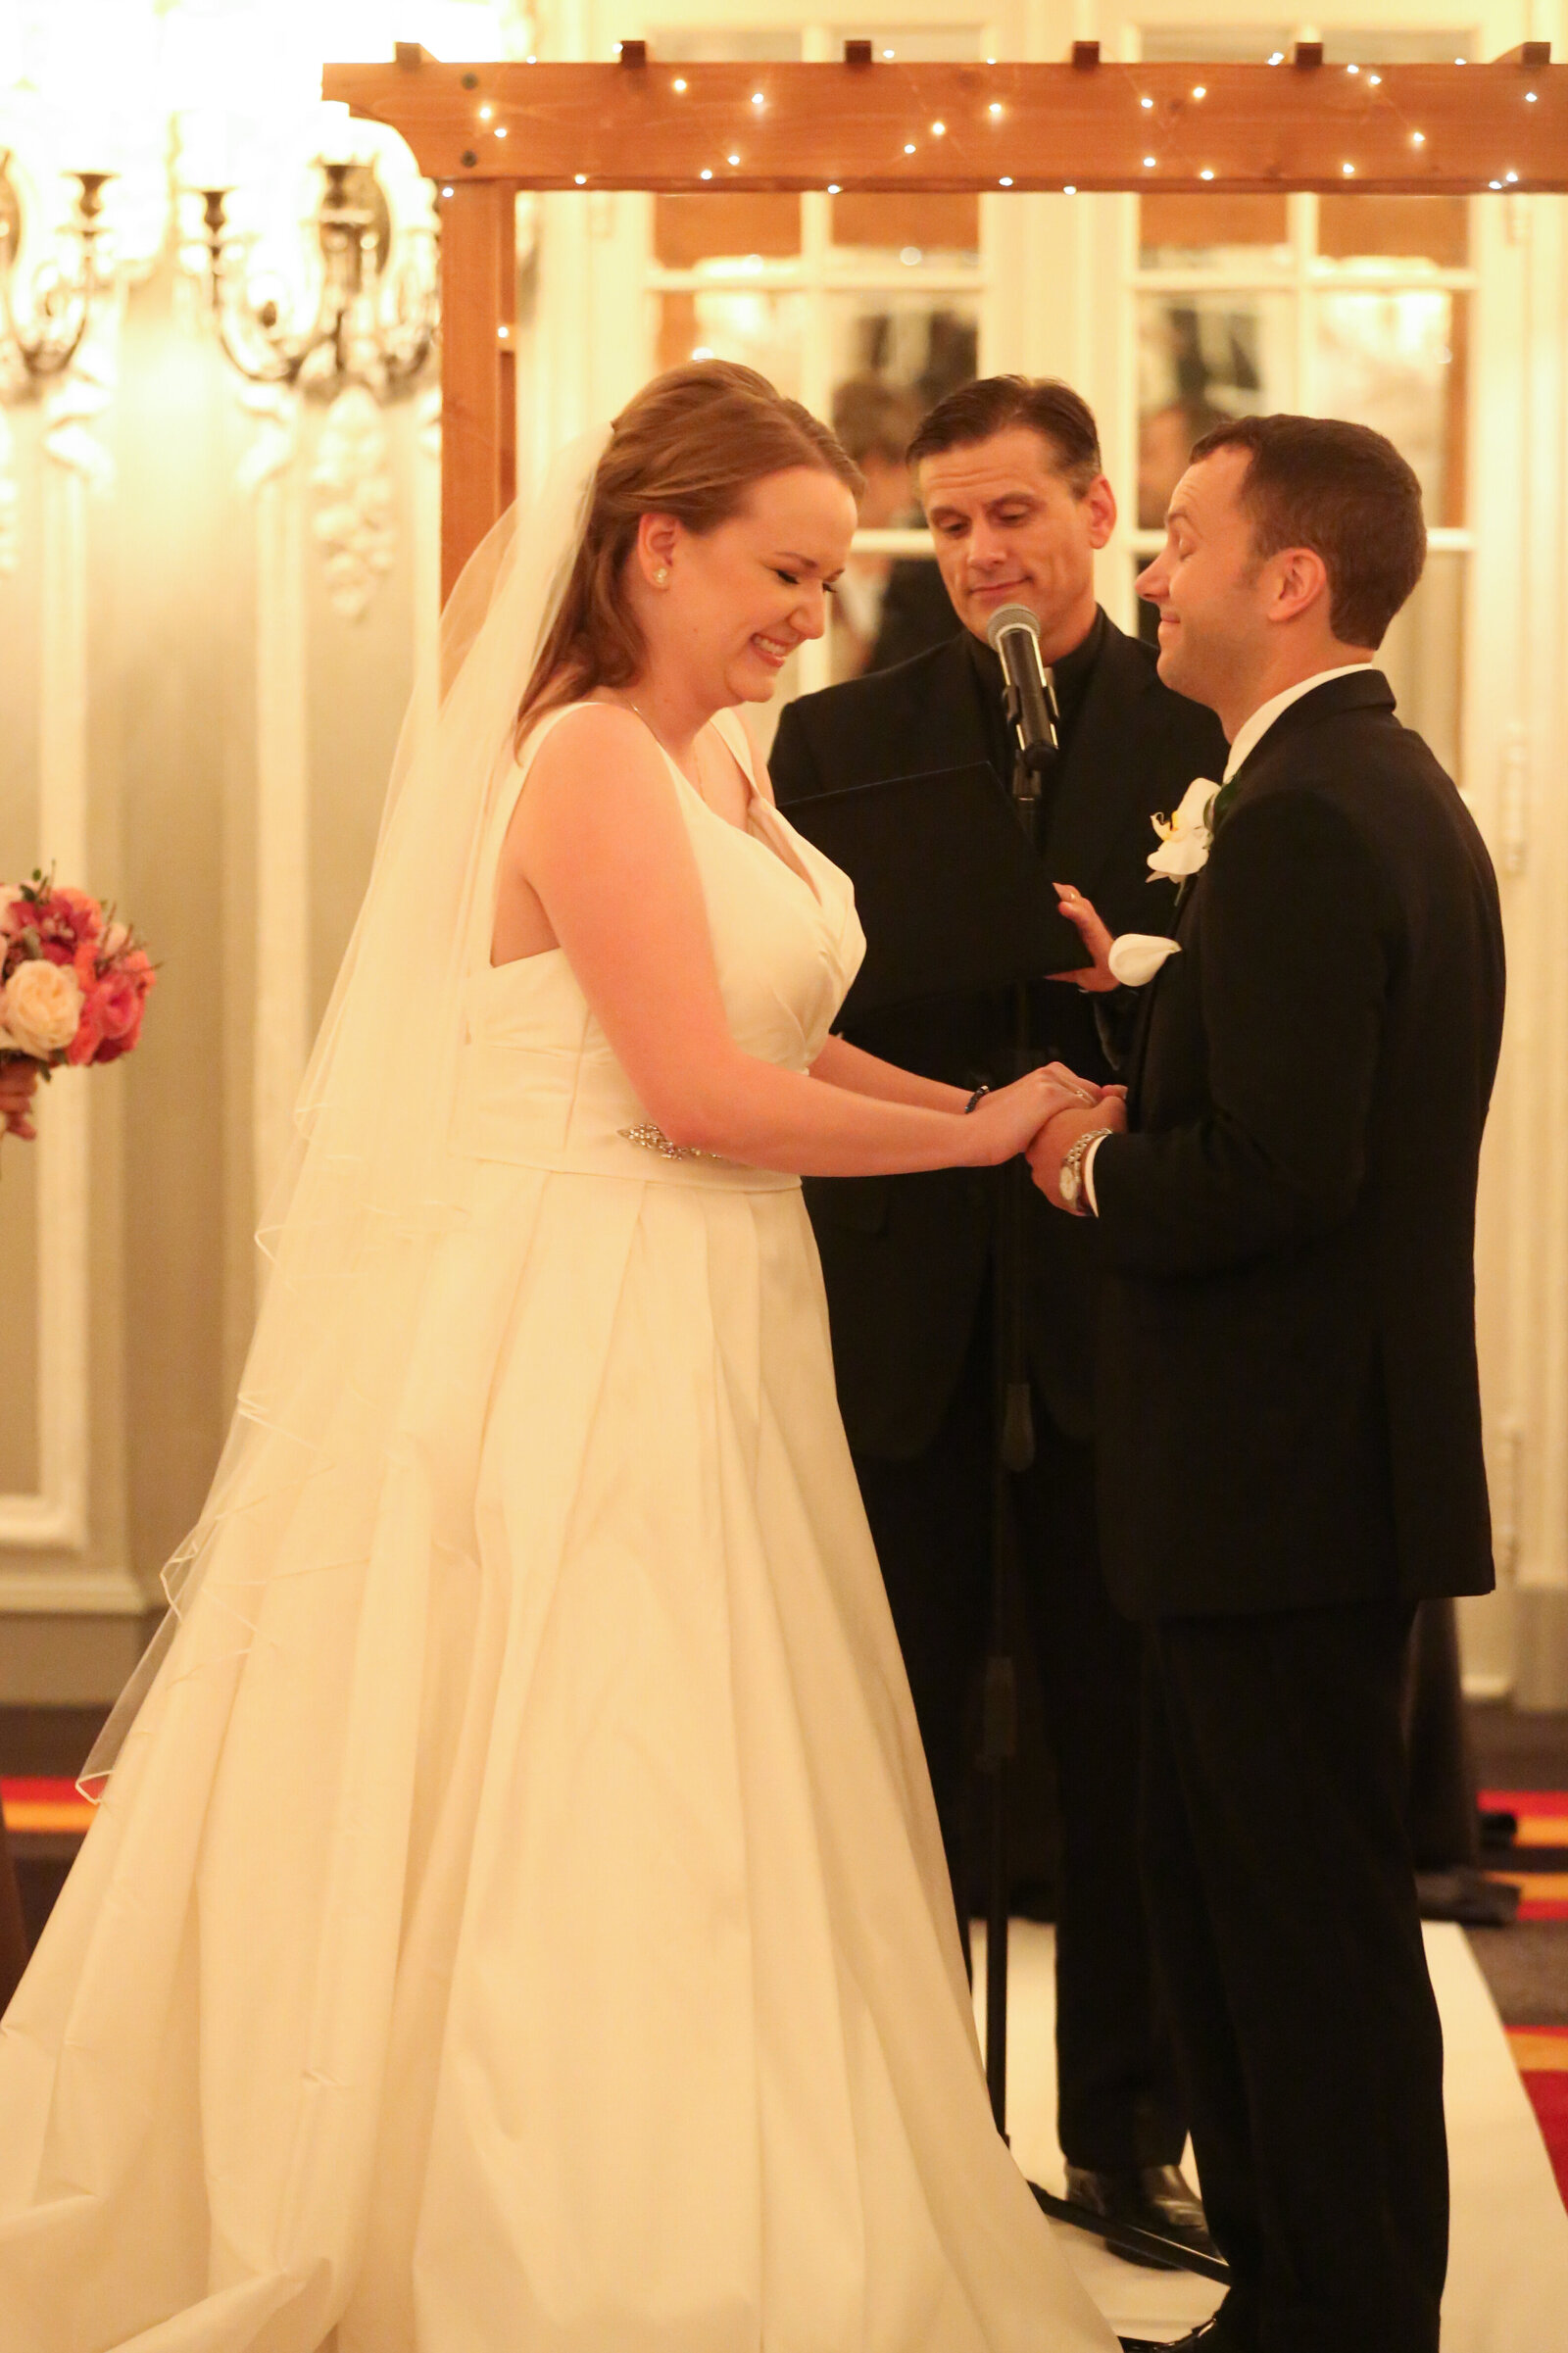 Bride laughs as she holds her groom's hands during wedding ceremony